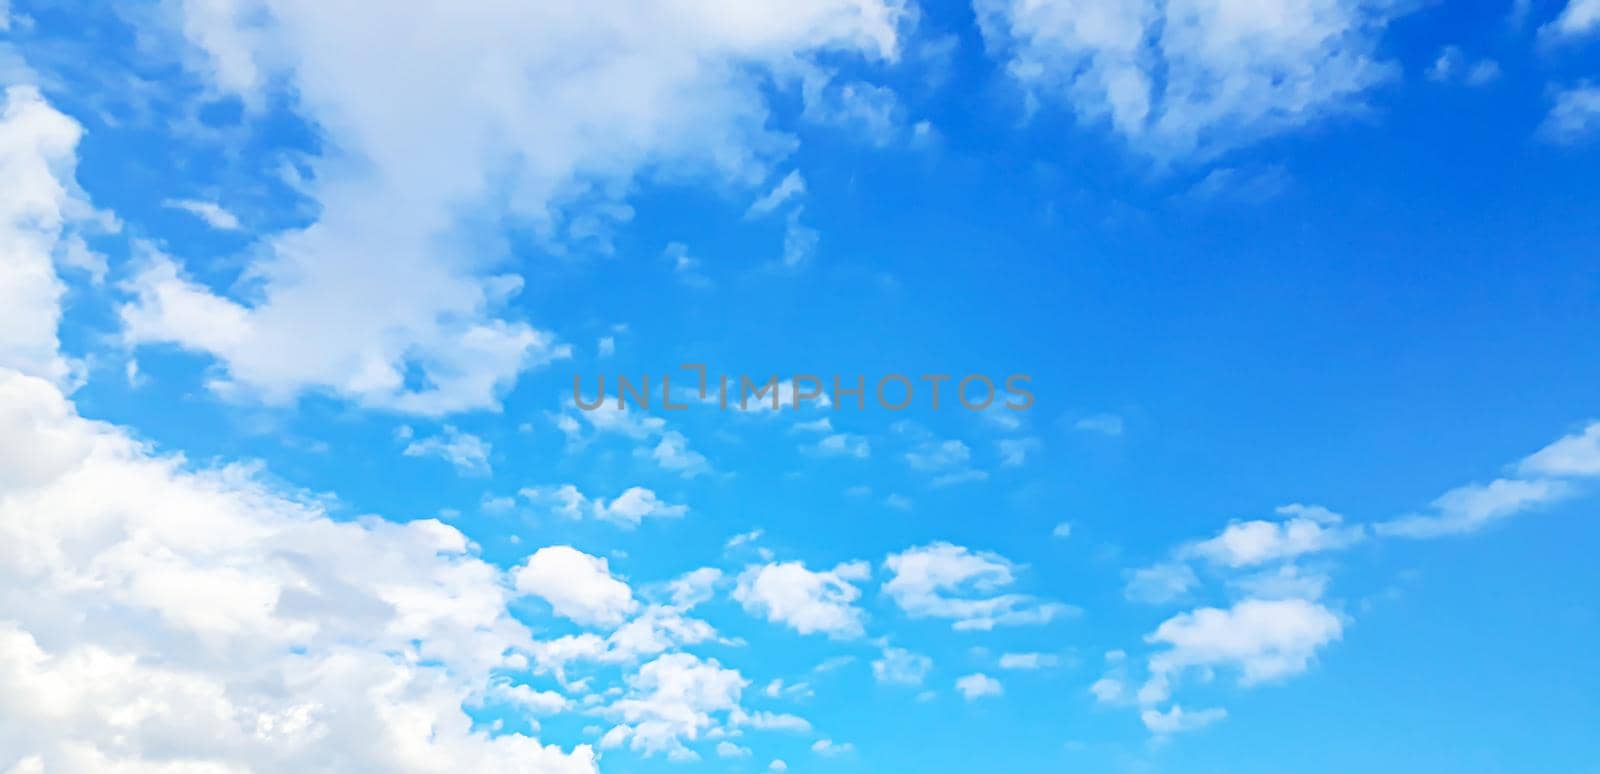 Blue sky with clouds selective focus nature sky by mila1784